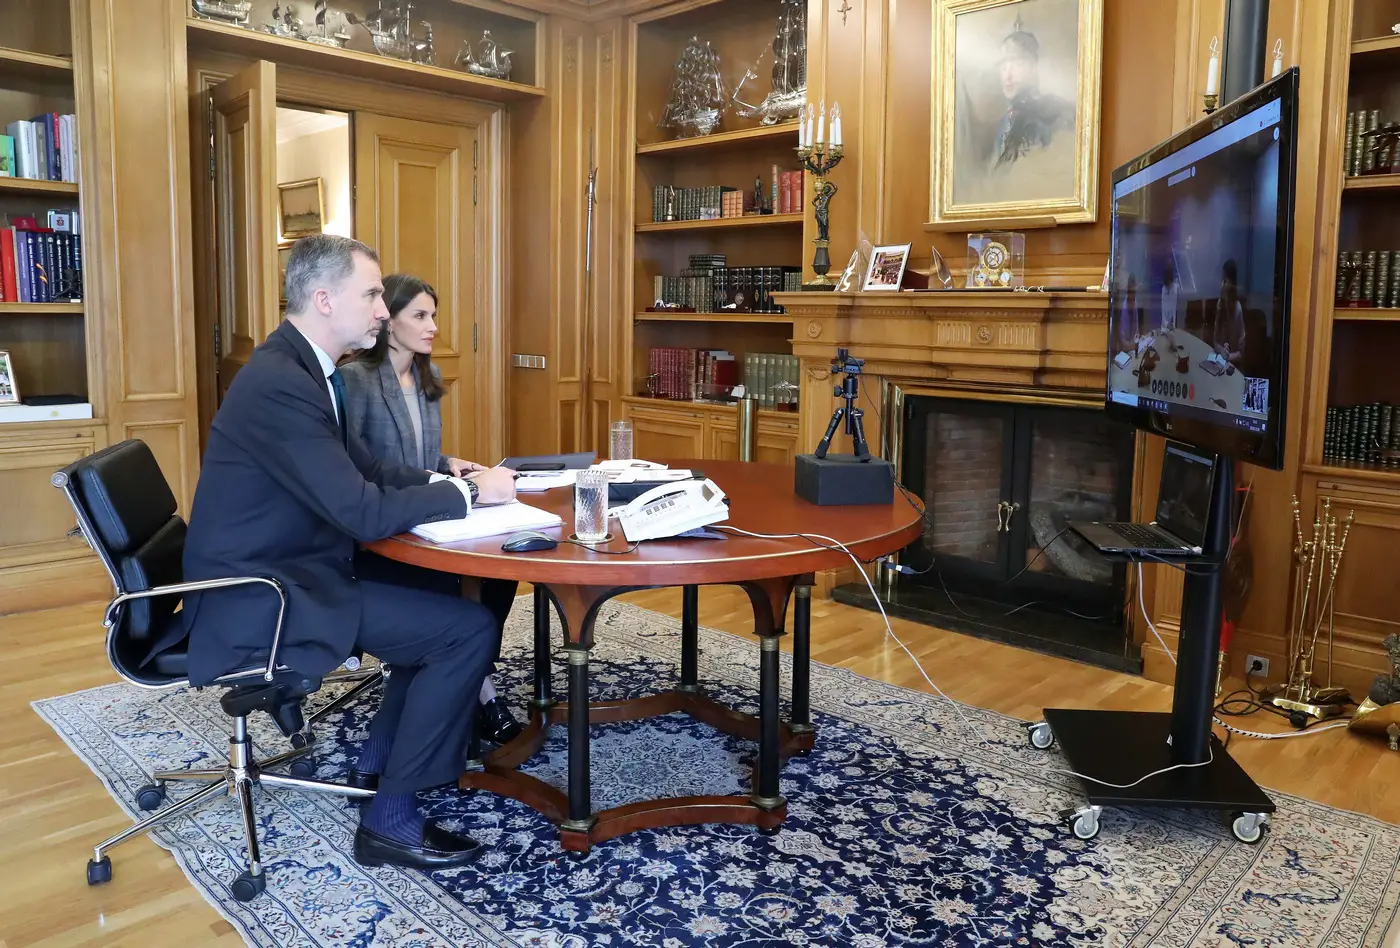 Felipe and Letizia attended a video conference with officials of the World Health Organization